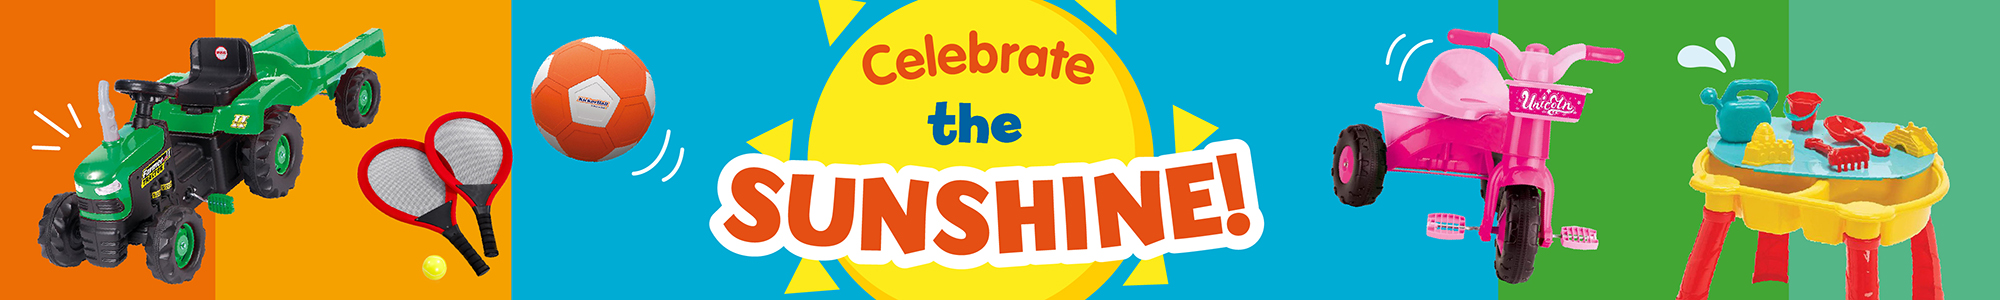 00196_2022_celebrate_the_sunshine_banners_V2_brand page 2000x300px.jpg